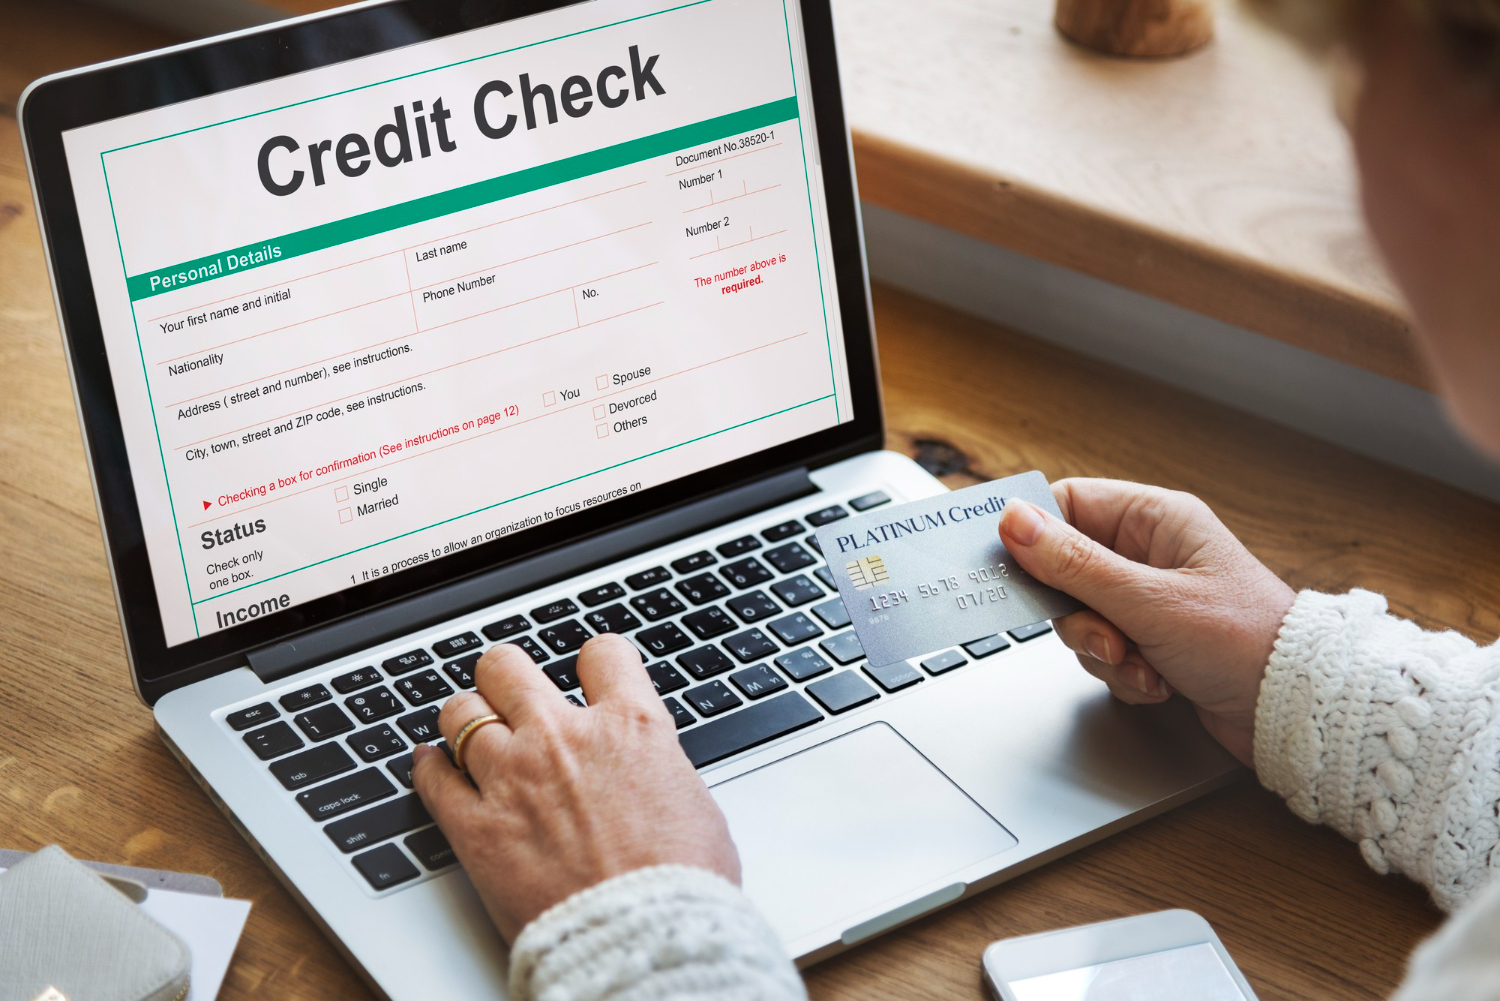 If you need to check your customers credit score, you can use iSoftpull services. Source: Freepik.